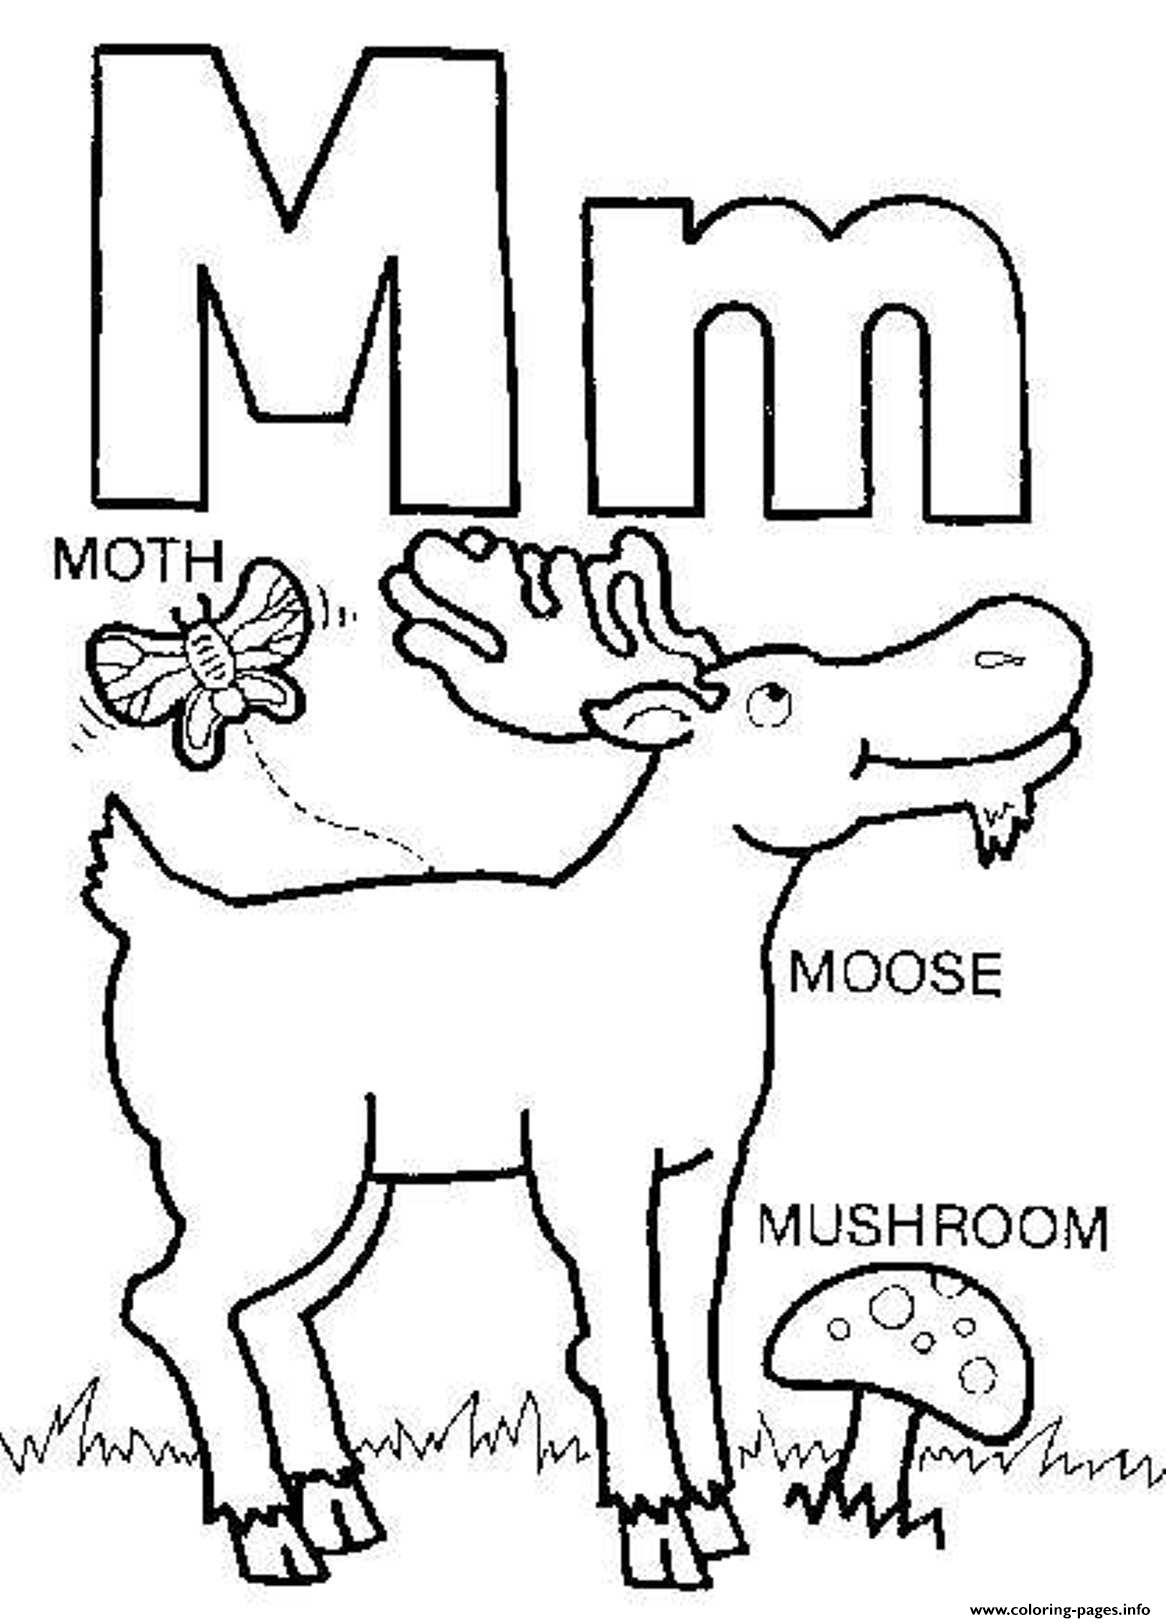 m-words-free-alphabet-s70ac-coloring-page-printable